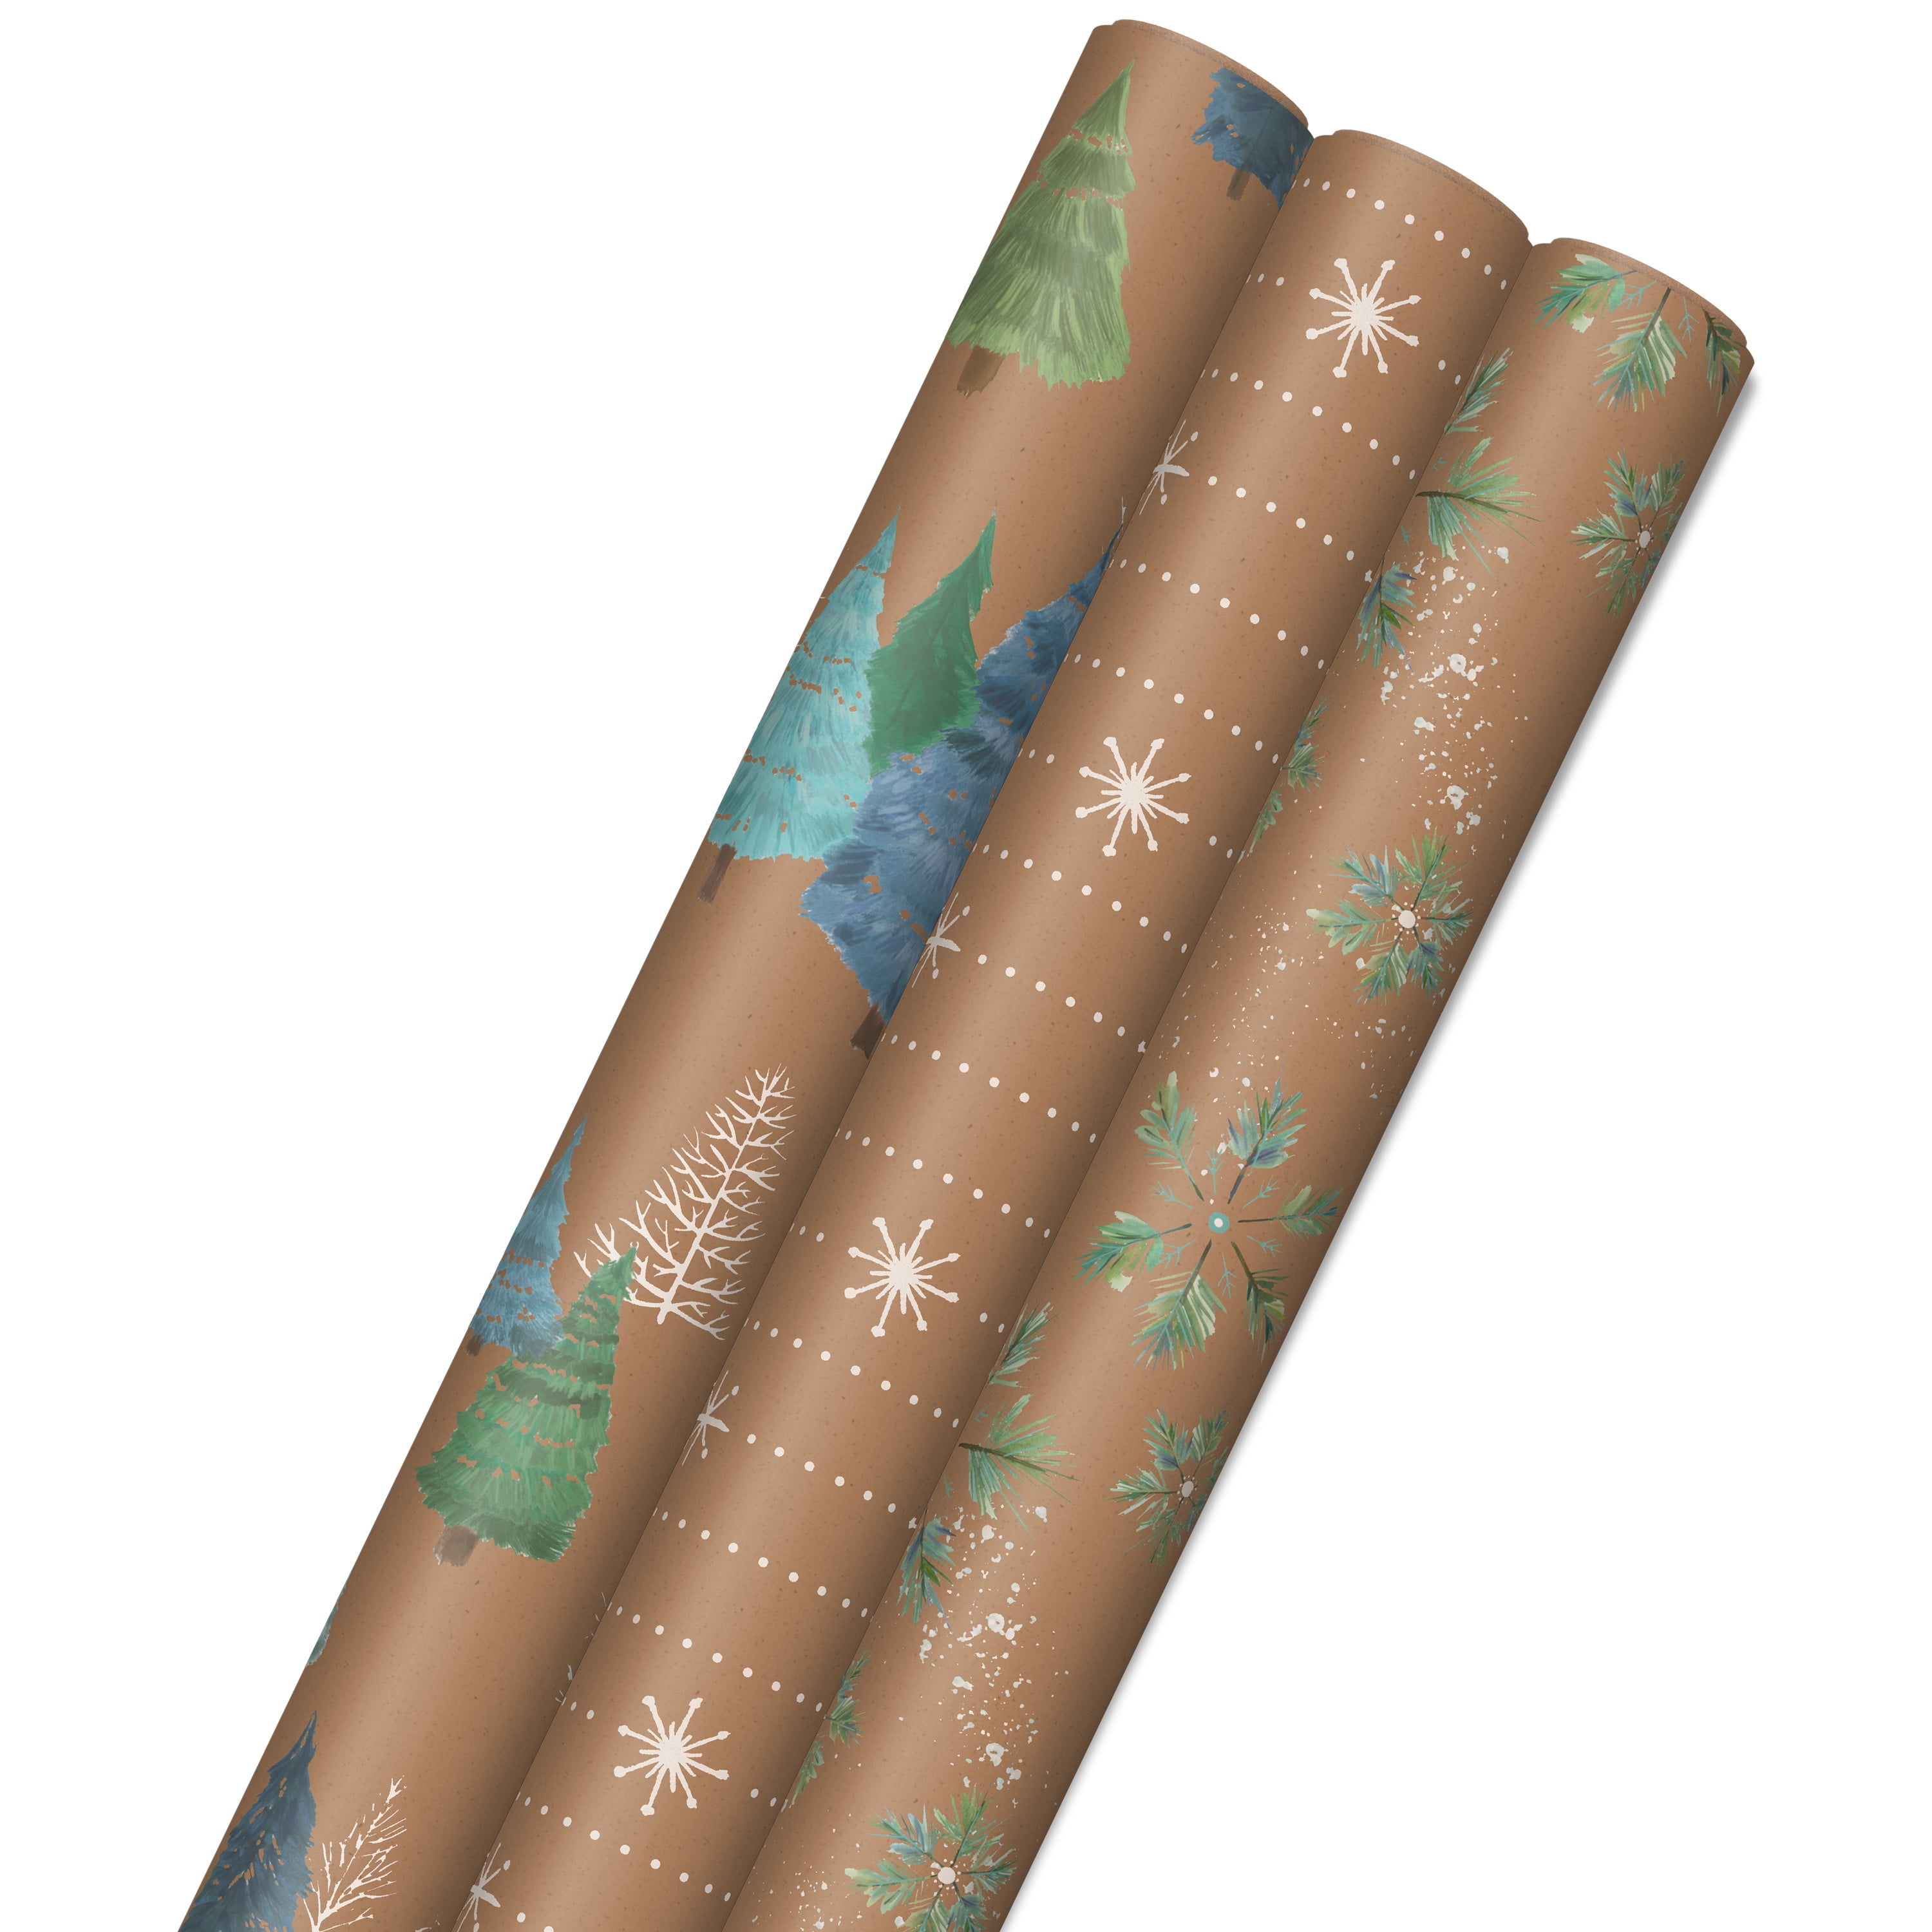 Hallmark Christmas Wrapping Paper Santa Foil Pack of 3, 60 sq. ft. ttl. 